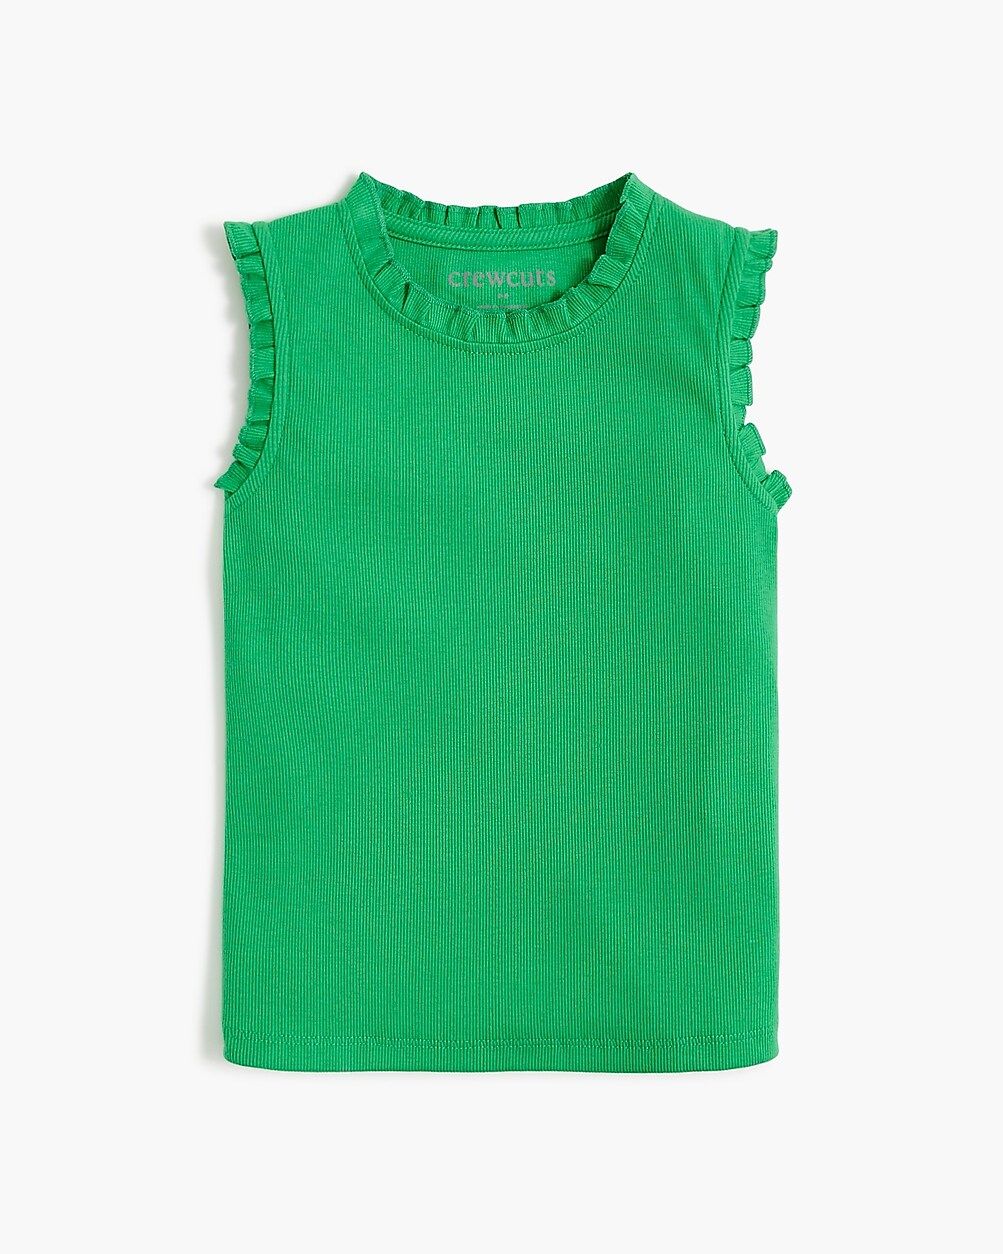 Girls' ribbed tank top with ruffle trim | J.Crew Factory